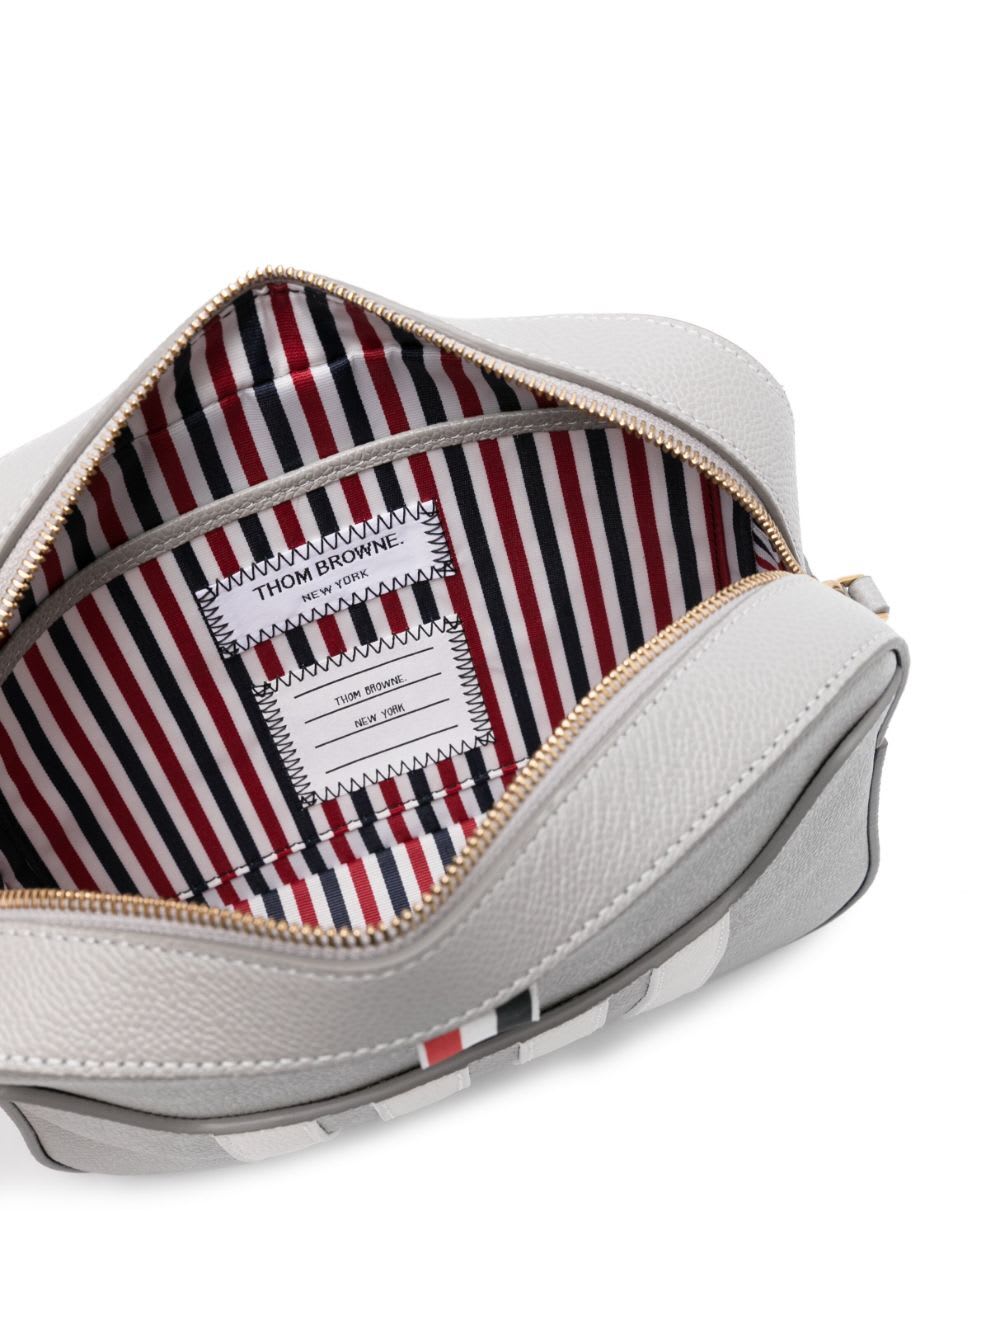 Shop Thom Browne Small Camera Bag With Rwb Strap & 4 Bar Stripes In Pebble Grain Leather In Lt Grey